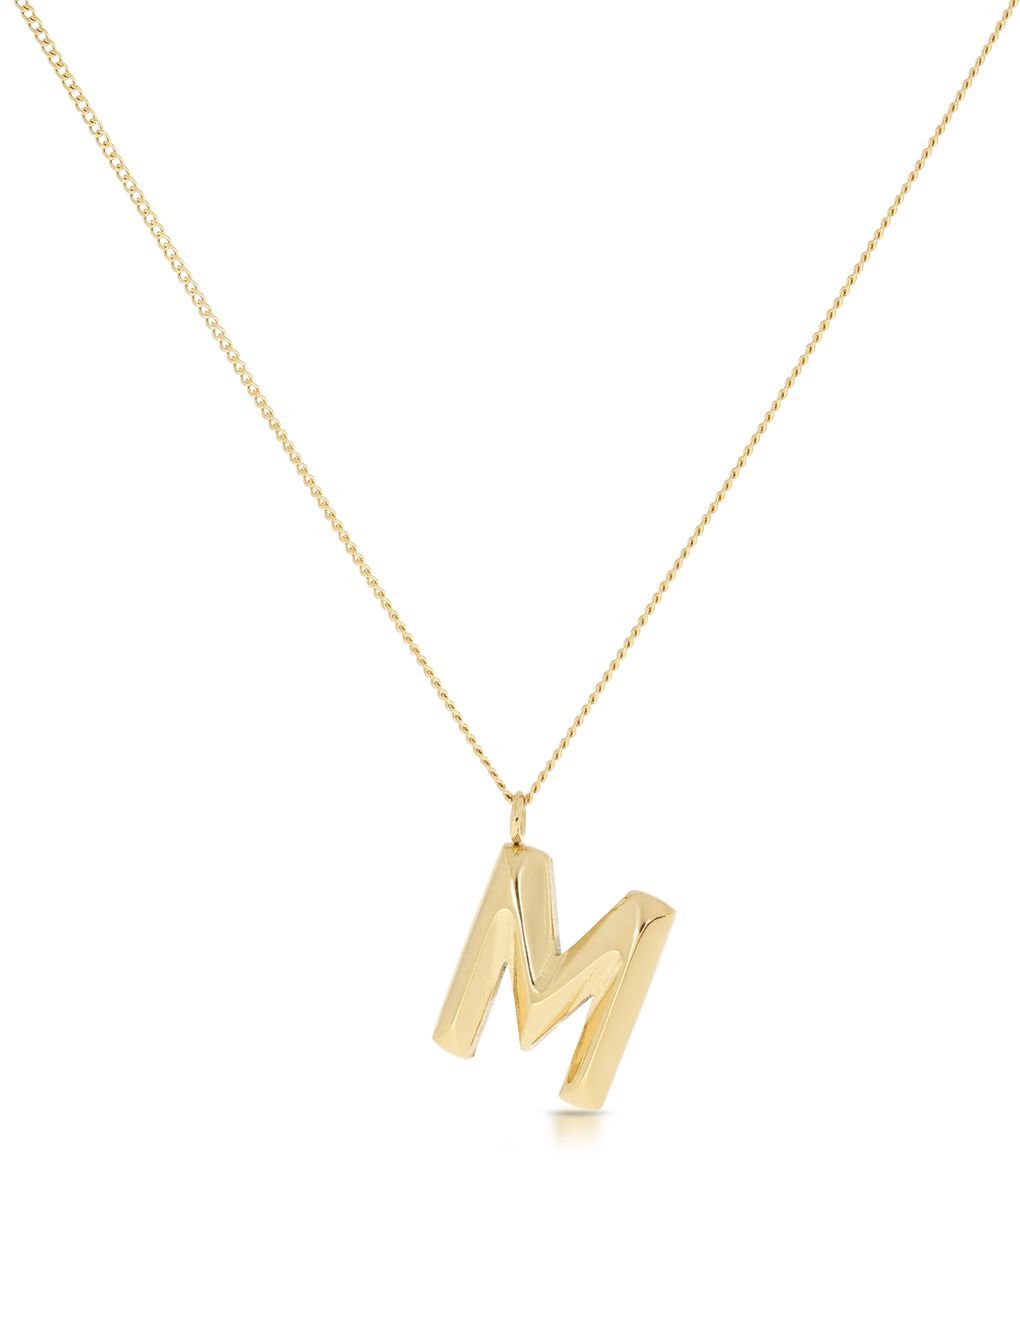 Initial Necklaces That Aren't Naff, To Give To Your Best Girls